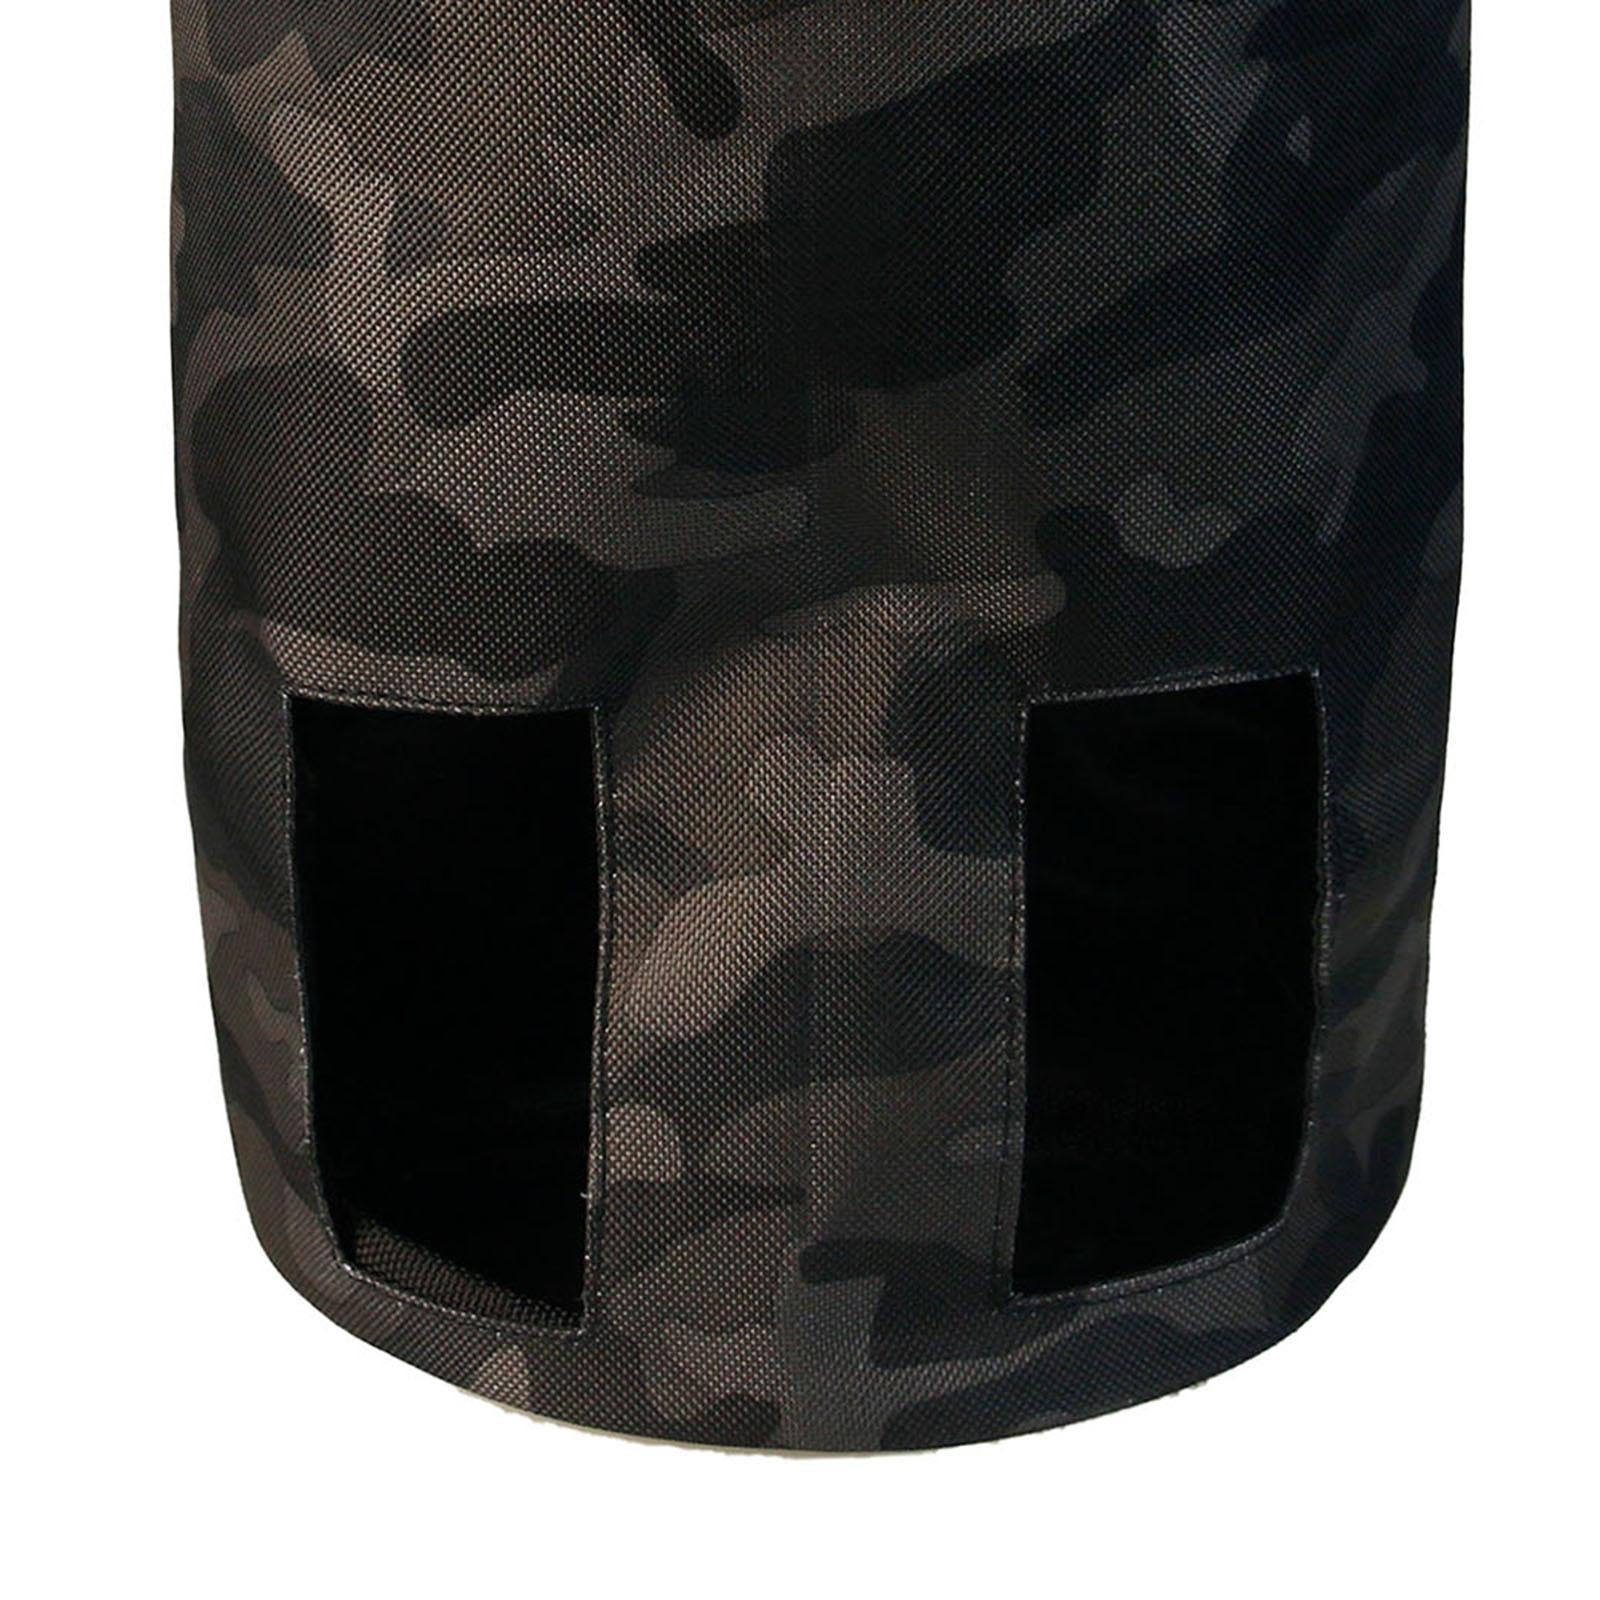 Rabbit Hay Feeder Bag Hay Bag Hanging Pouch Feeder 2 Holes for Guinea Pig black camouflage